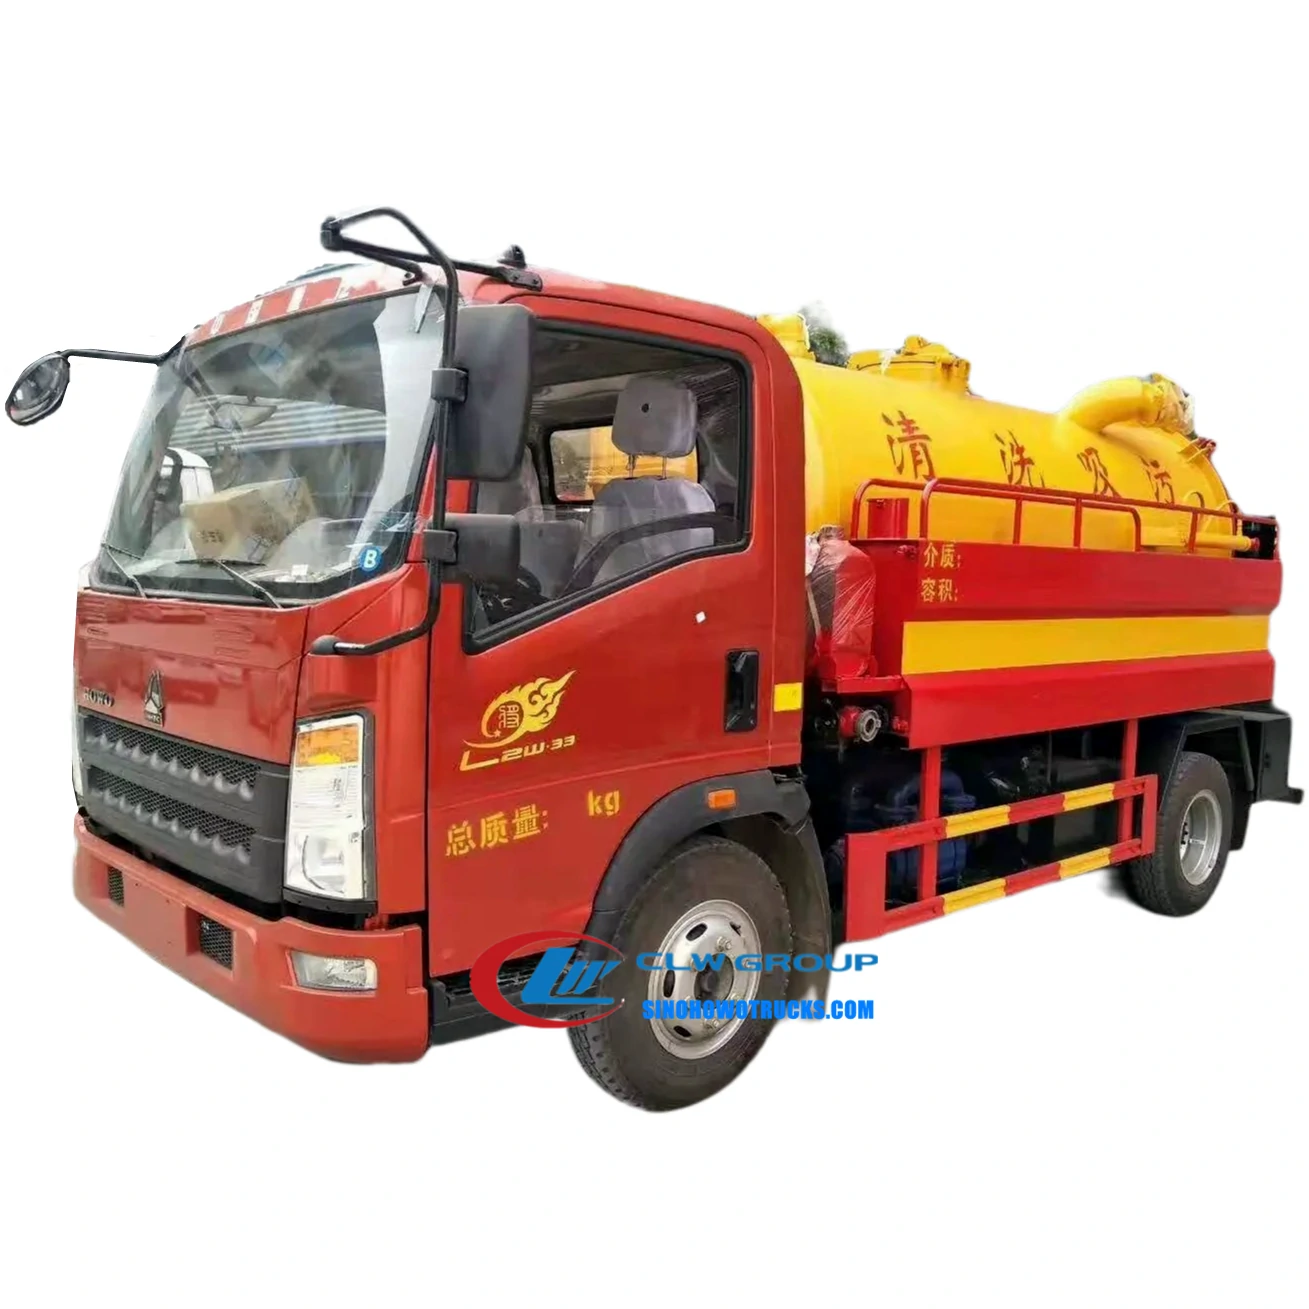 HOWO 5 ton jet vac tanker for sale Philippines